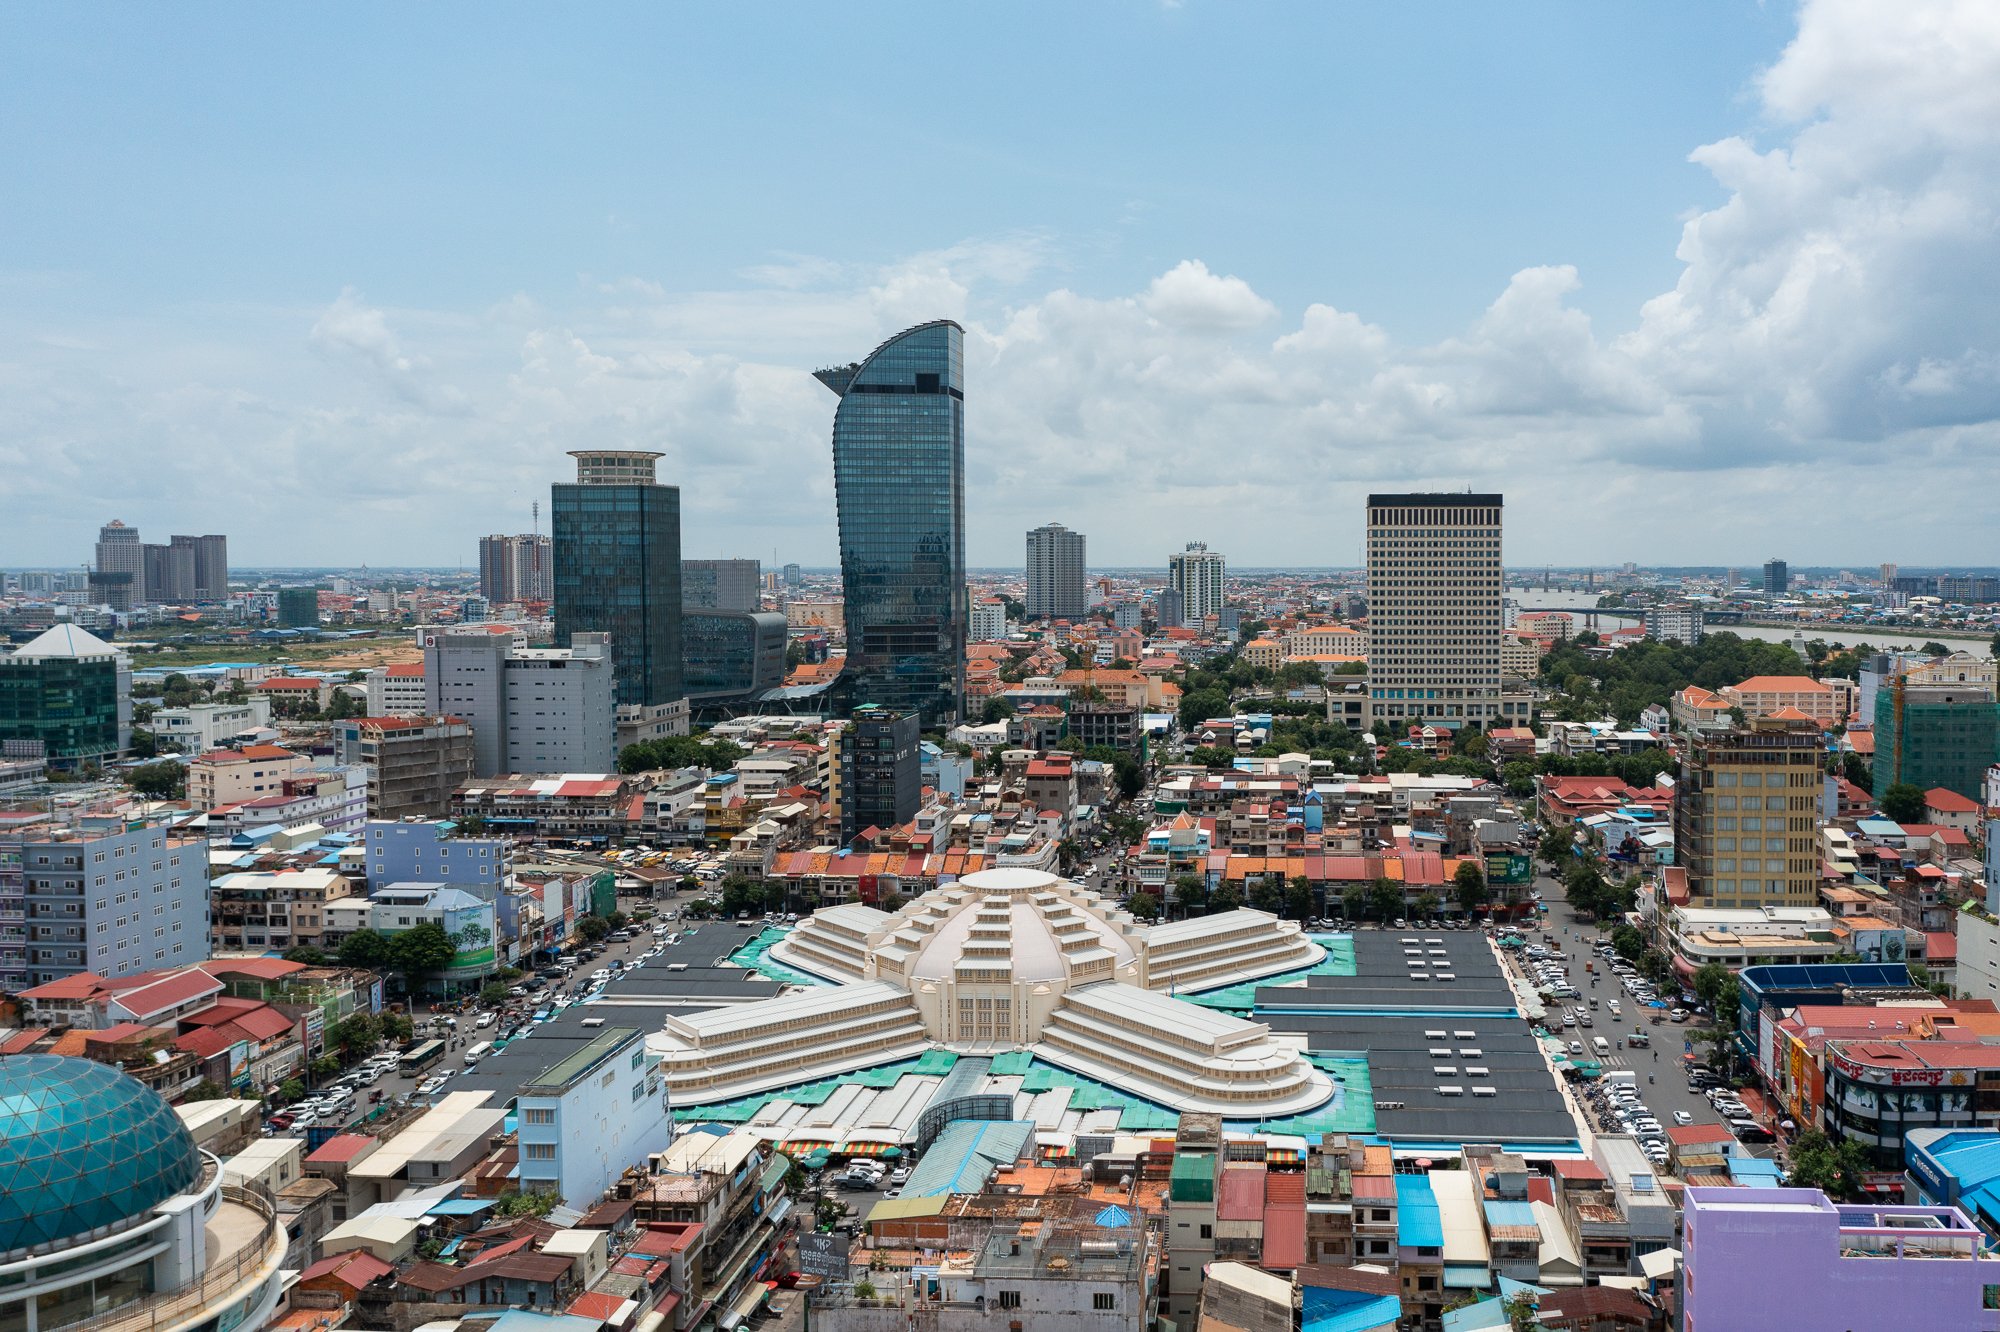 Drone photography of Central Market and Vattanac Town in Phnom Penh, Cambodia. Taken while working as a drone videographer for CNN